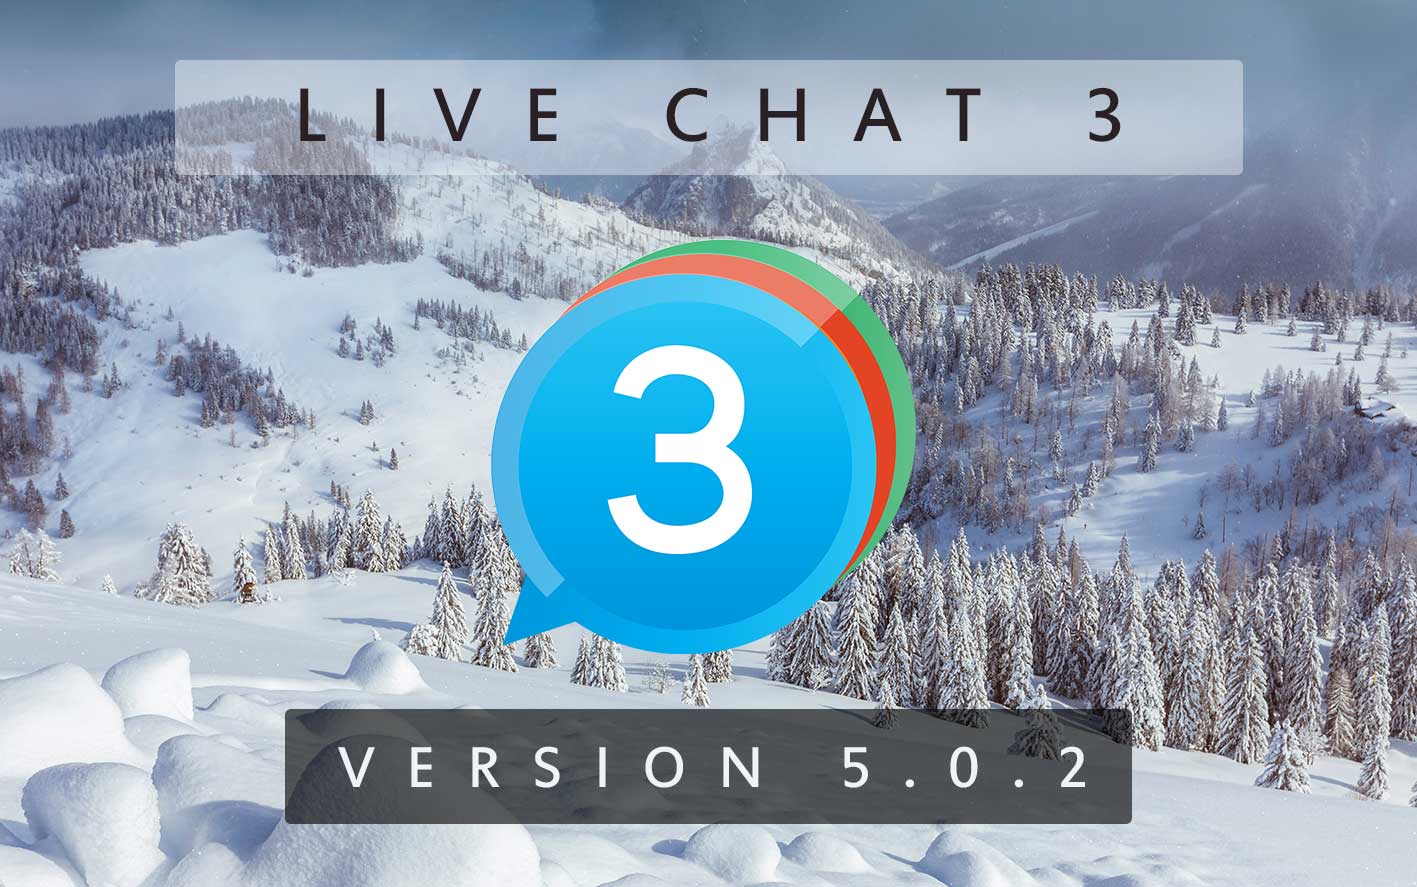 Live Chat 3 - Version 5.0.2